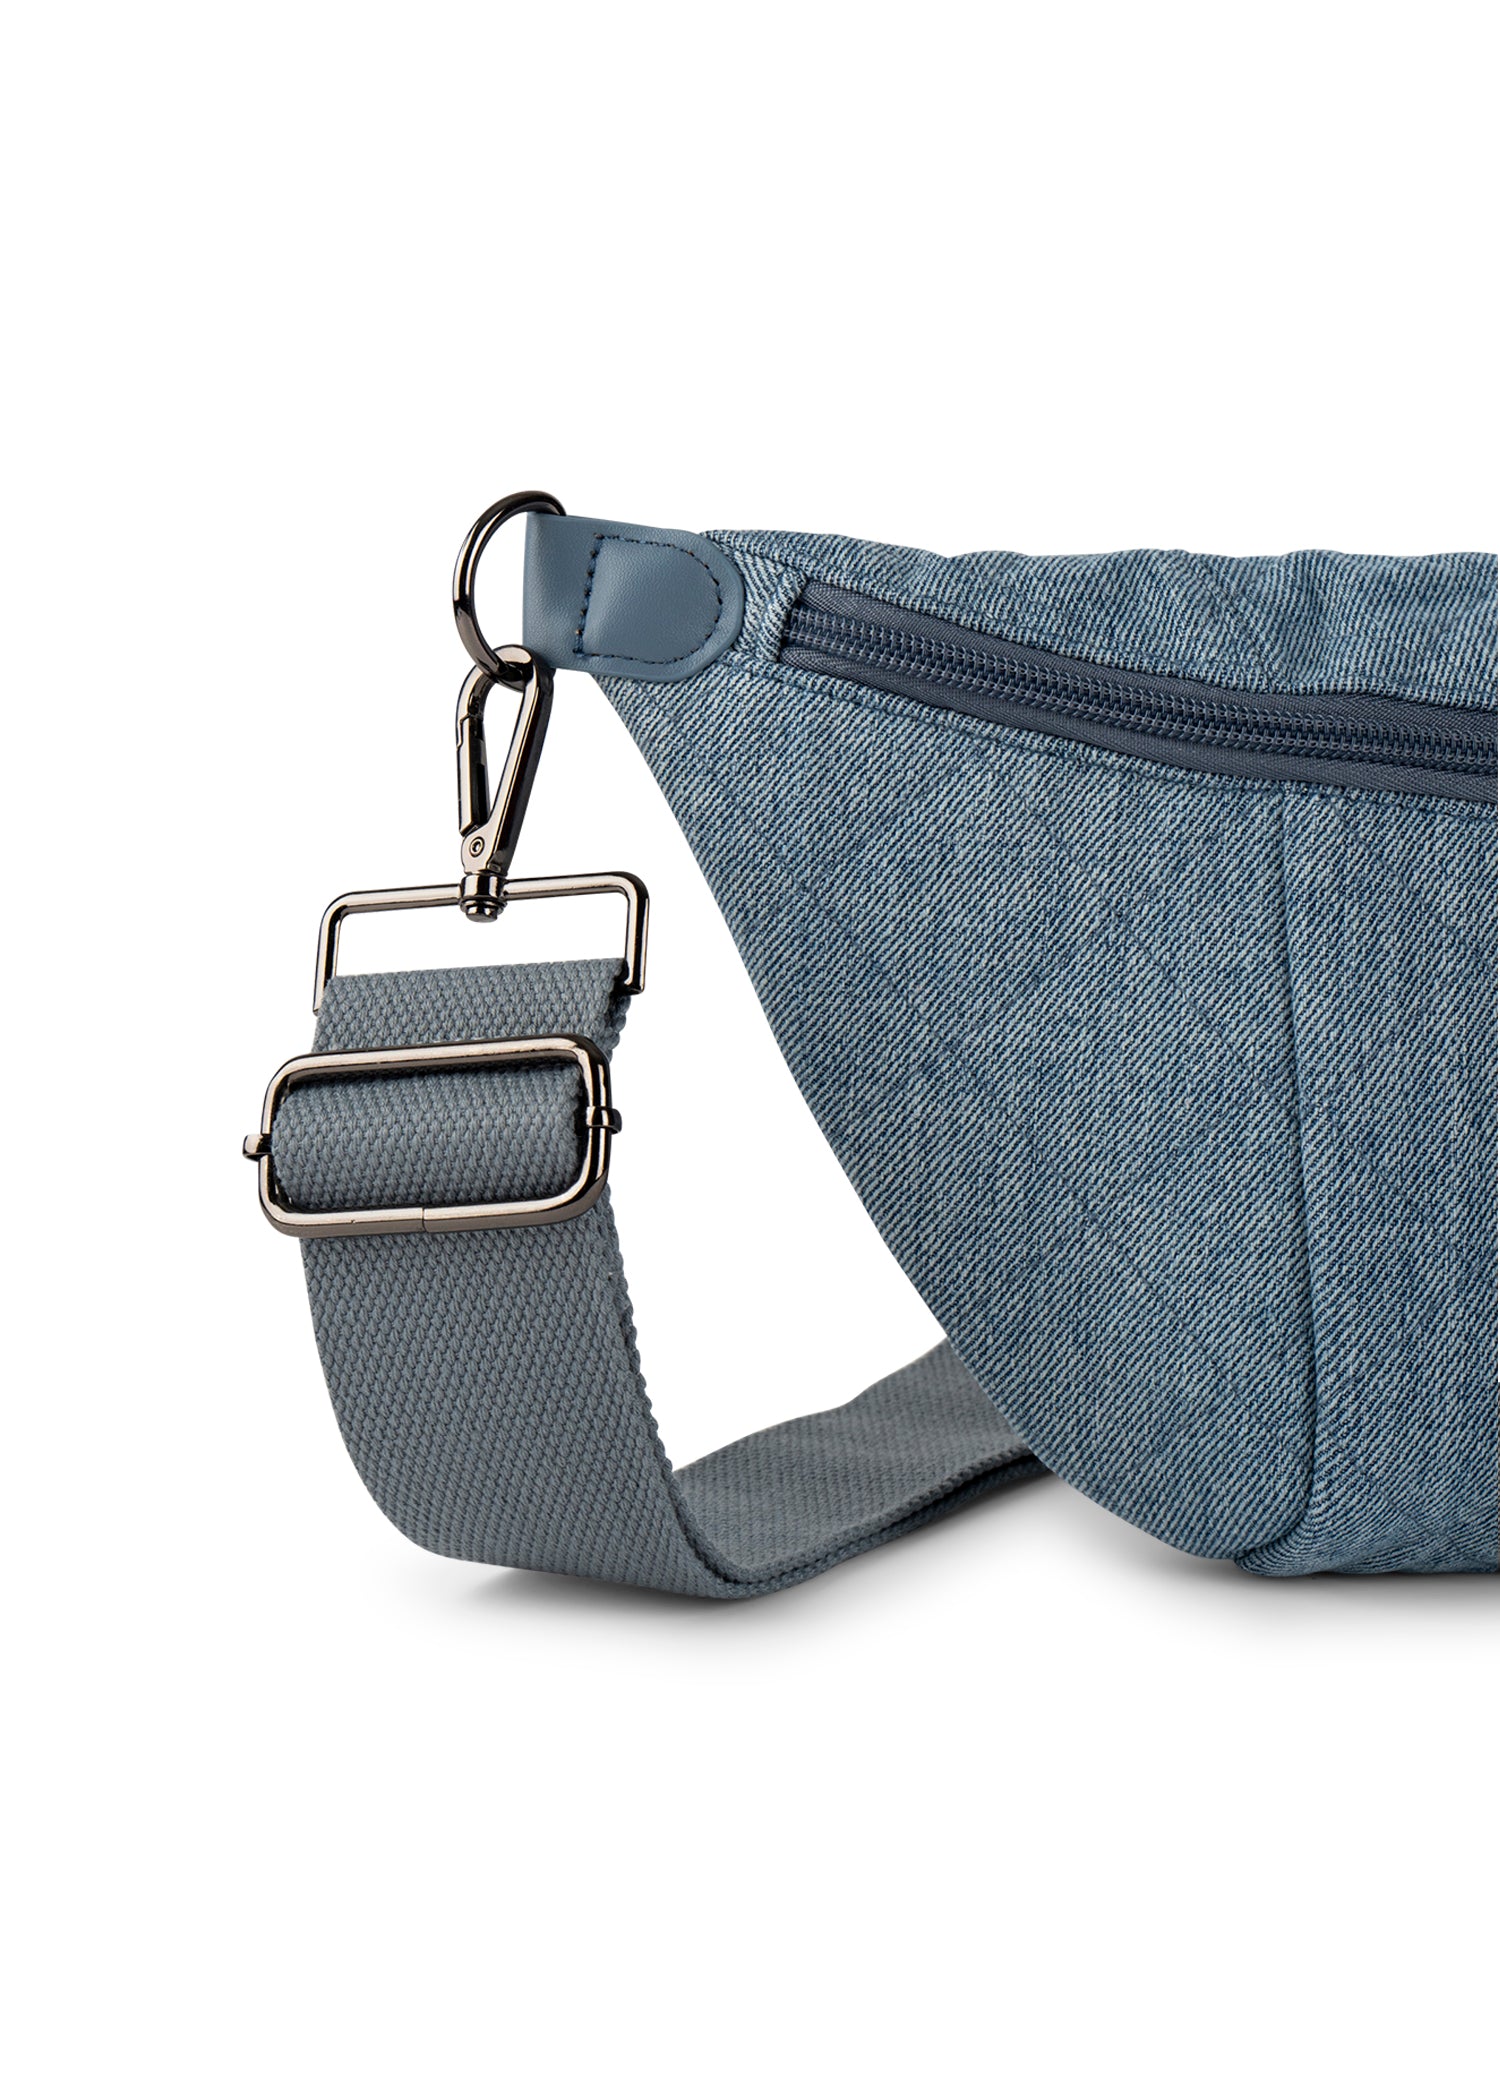 The Emily Montreal Sling Bag